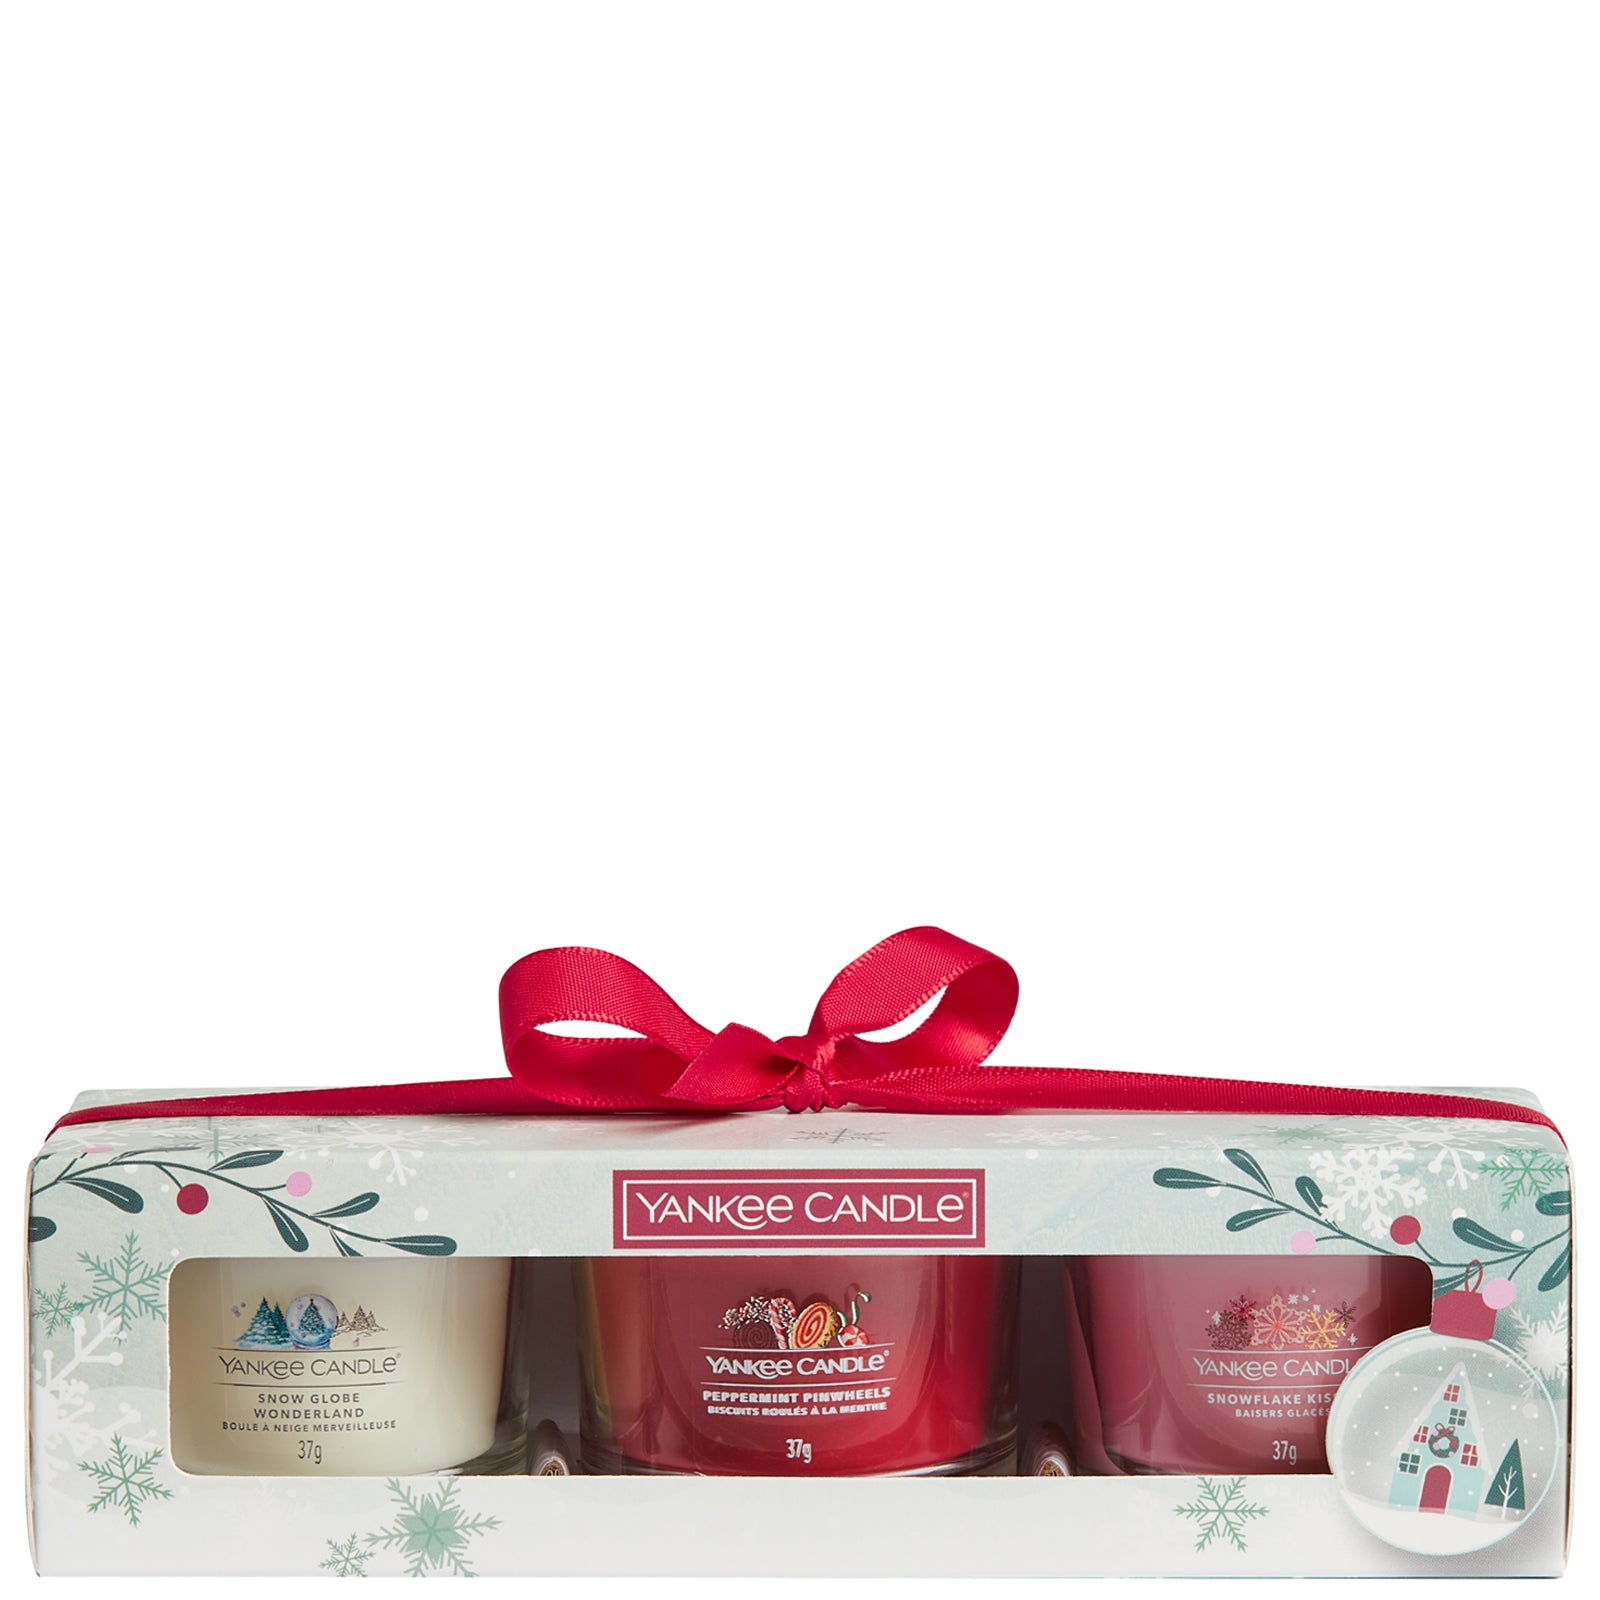 Yankee Candle Christmas 3 Filled Votive Gift Set